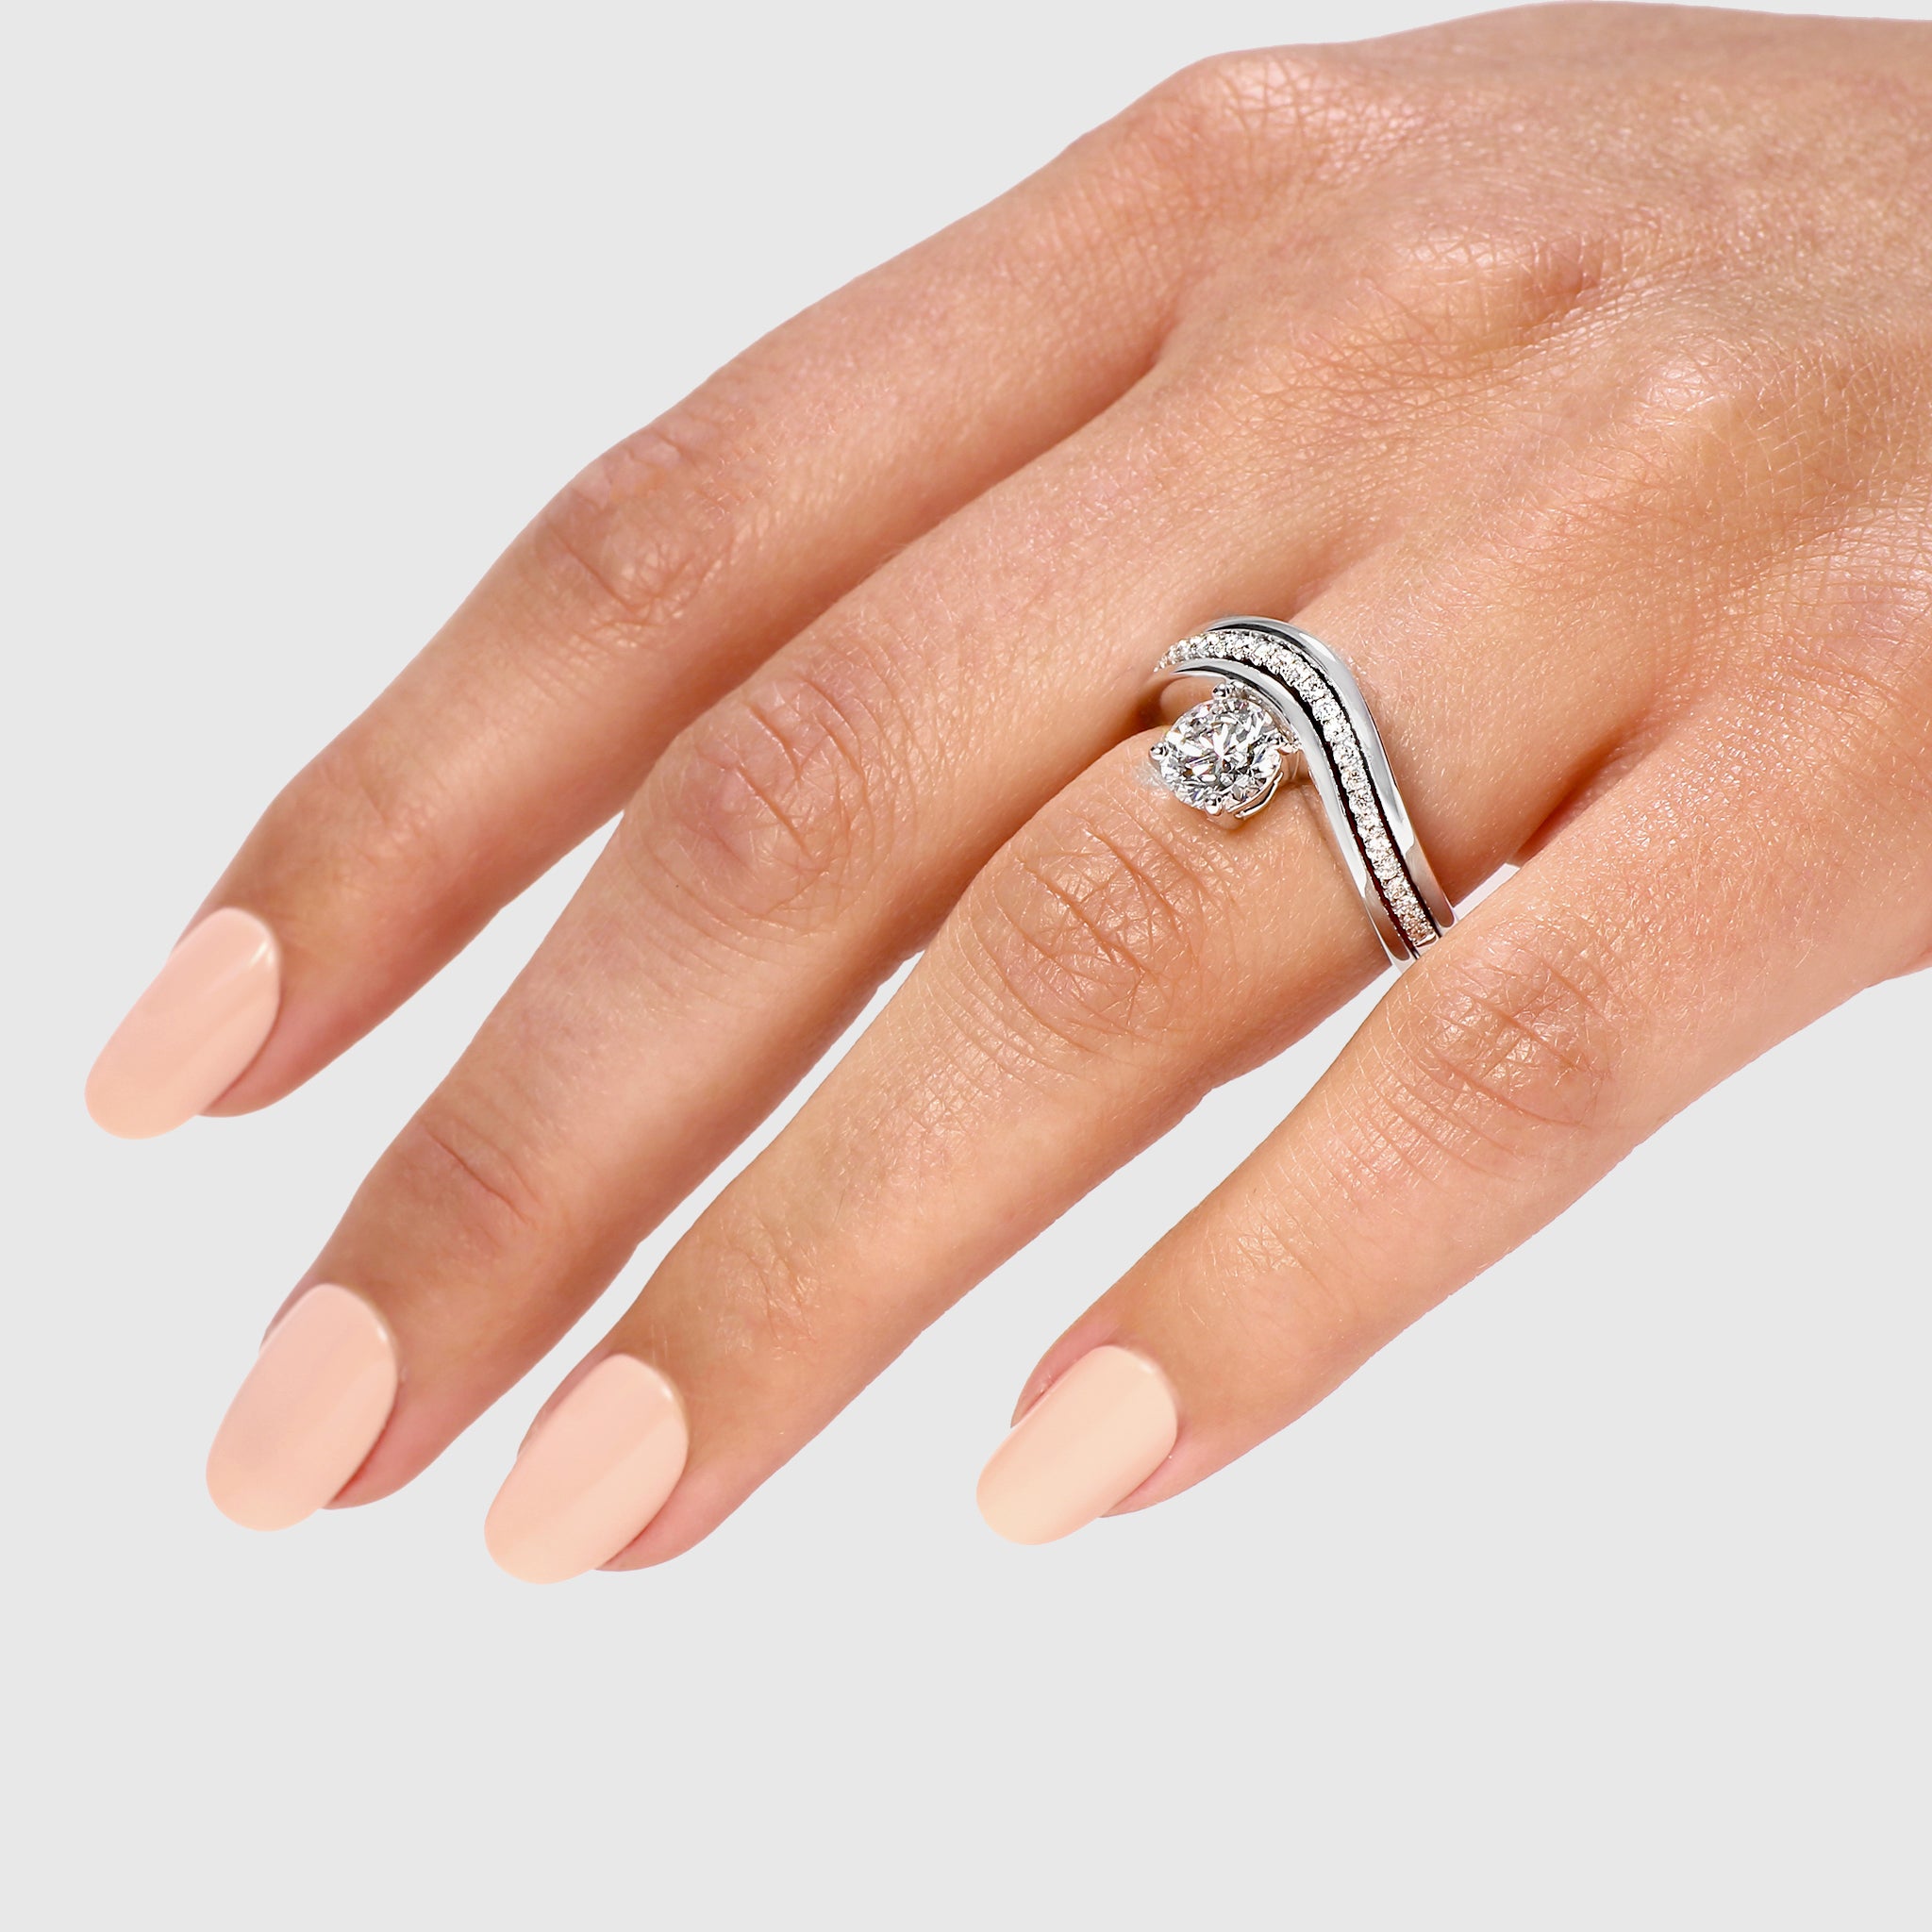 Shimansky - Women Wearing the Silhouette Diamond Microset Wedding Band crafted in 18K White Gold